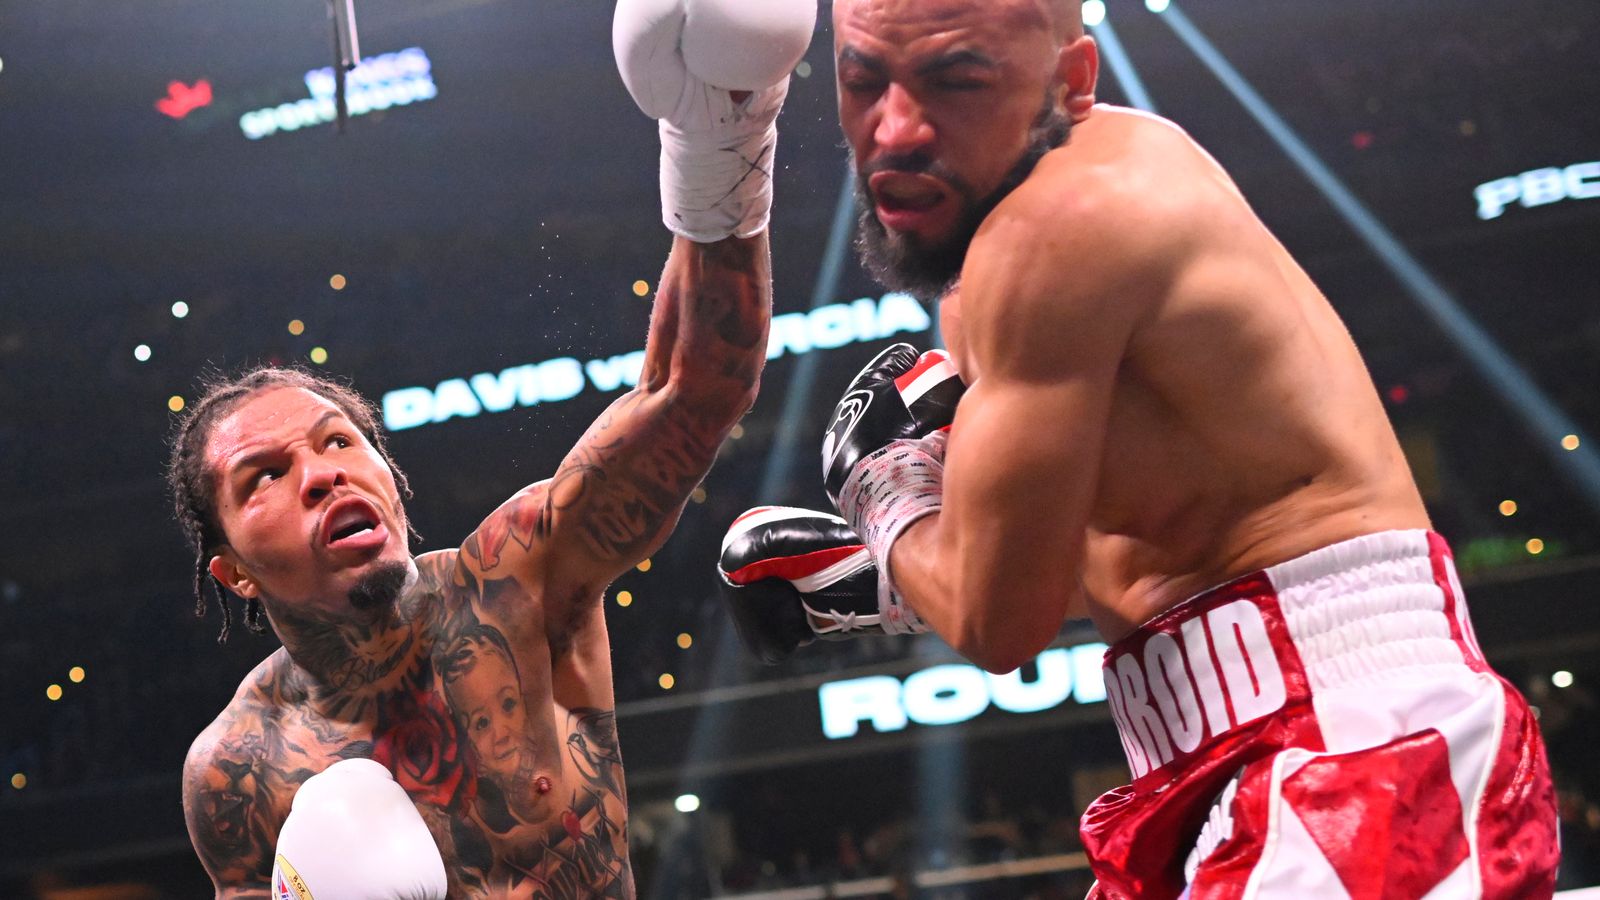 Gervonta Davis retains WBA lightweight title after stopping Hector Luis  Garcia in eight rounds via TKO, Boxing News